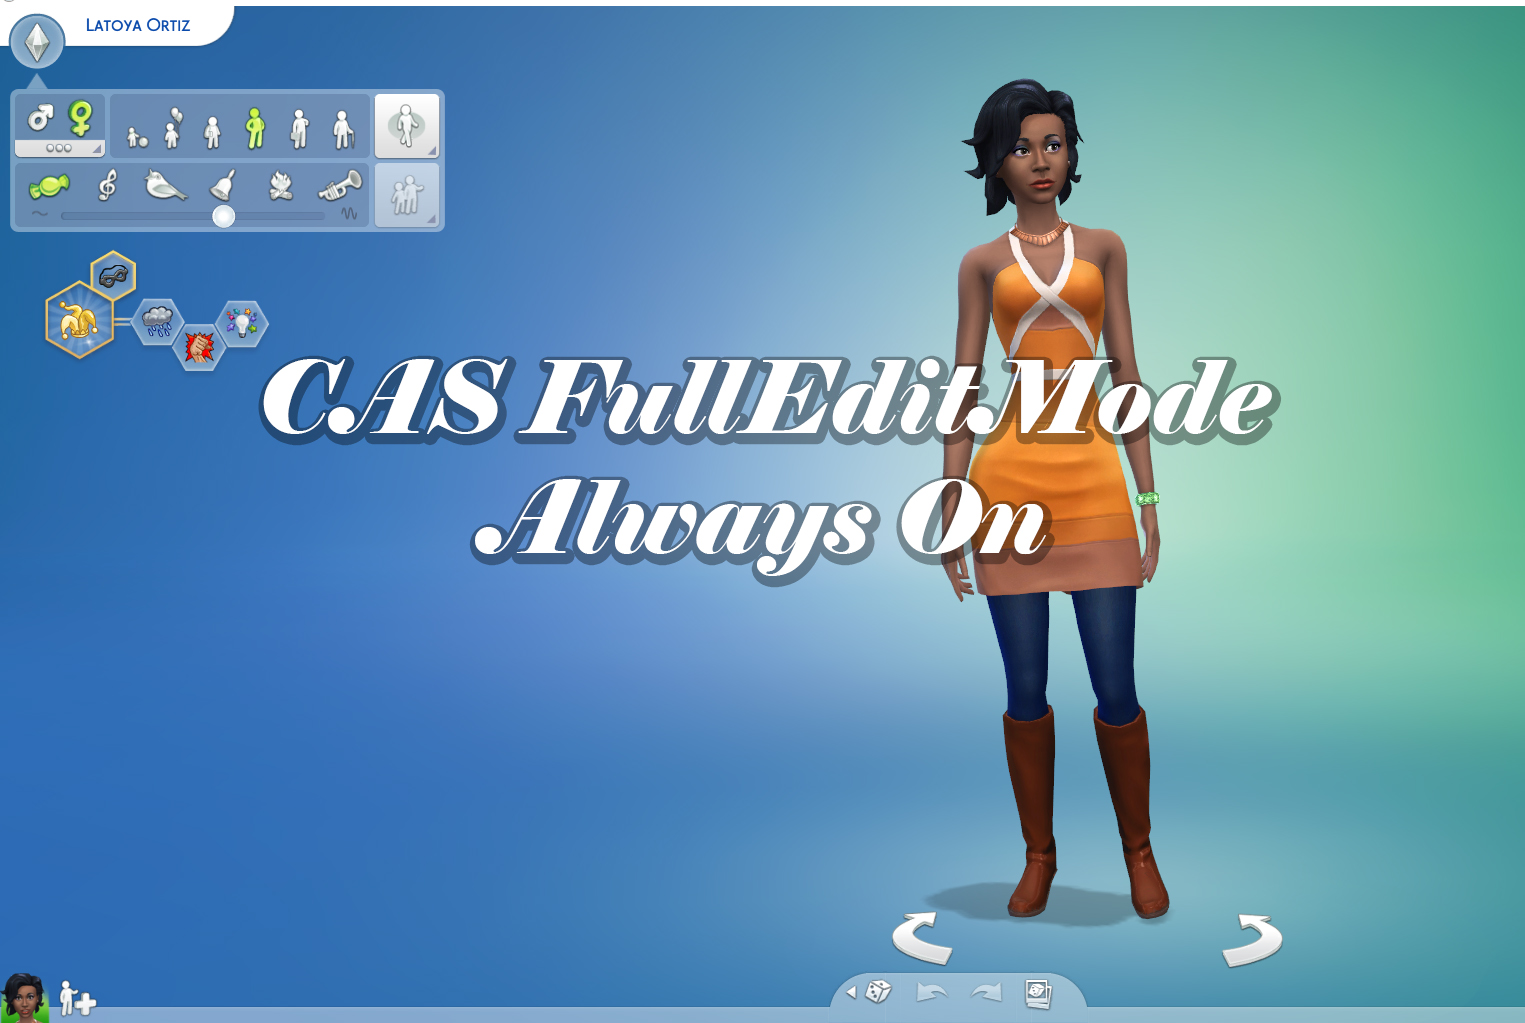 How To Use Full Edit Mode in the Sims 4